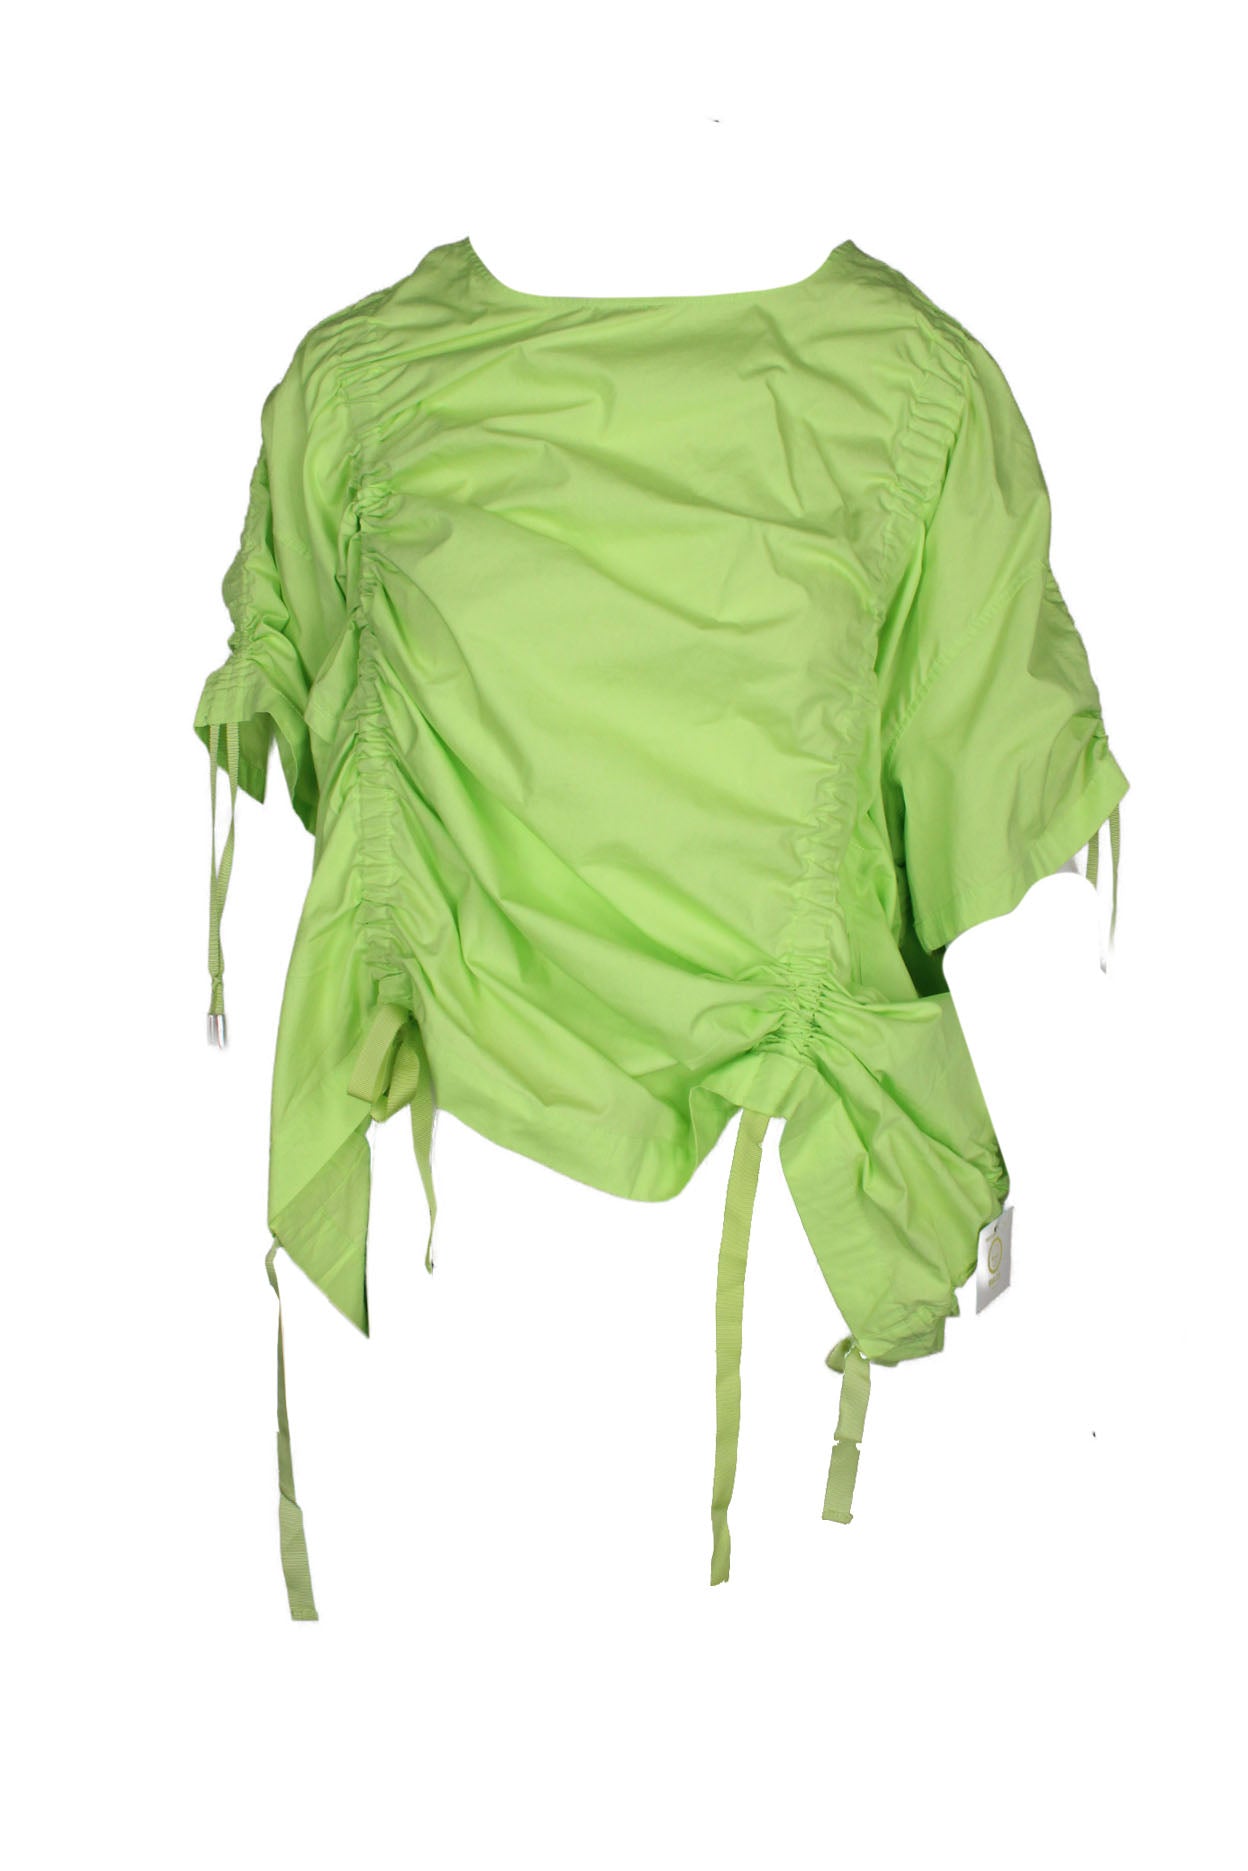 unlabeled neon green short sleeve top. features a ruched design throughout.